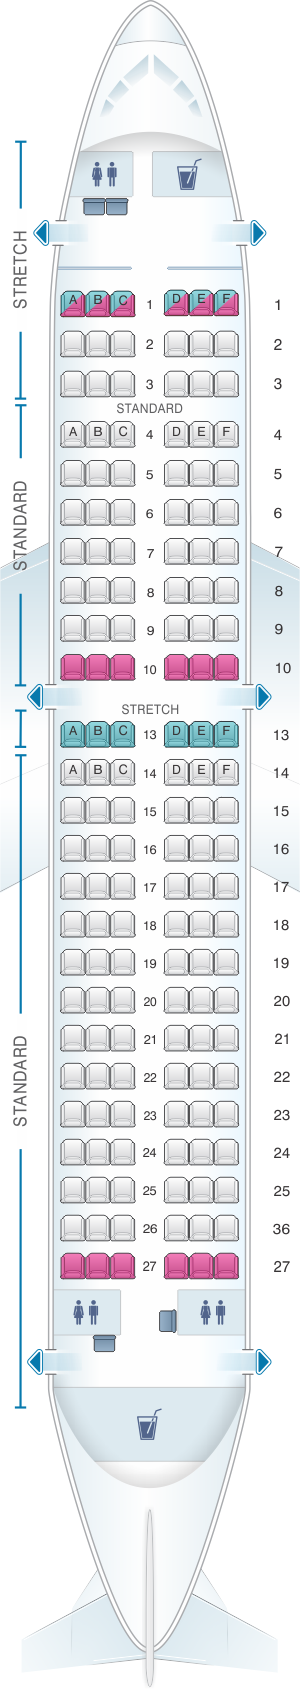 Airbus A320 Frontier Seat Map